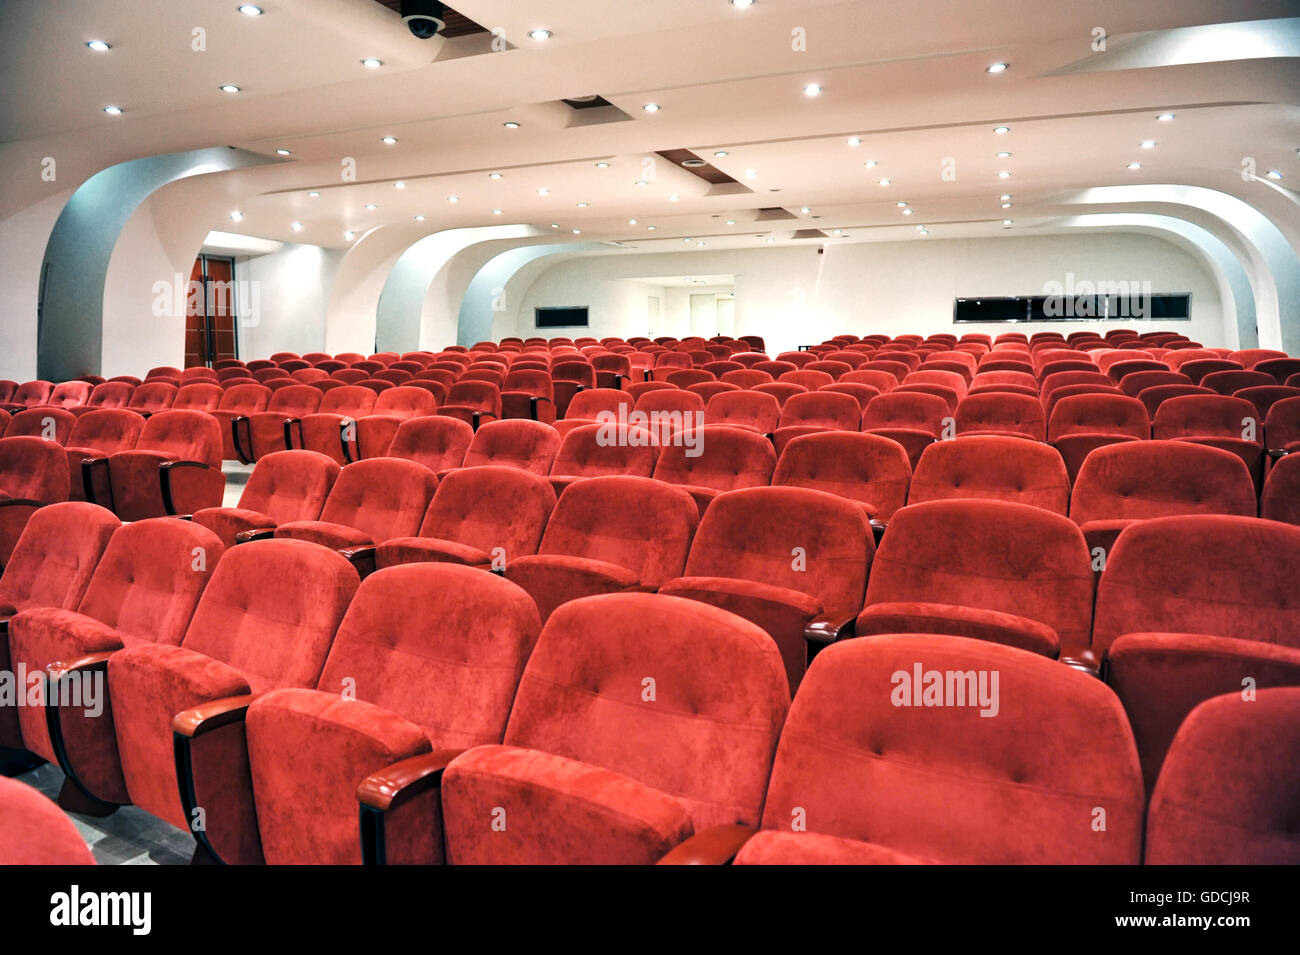 Rows of empty red seats for spectators in an auditorium, cinema or entertainment venue viewed close up Stock Photo